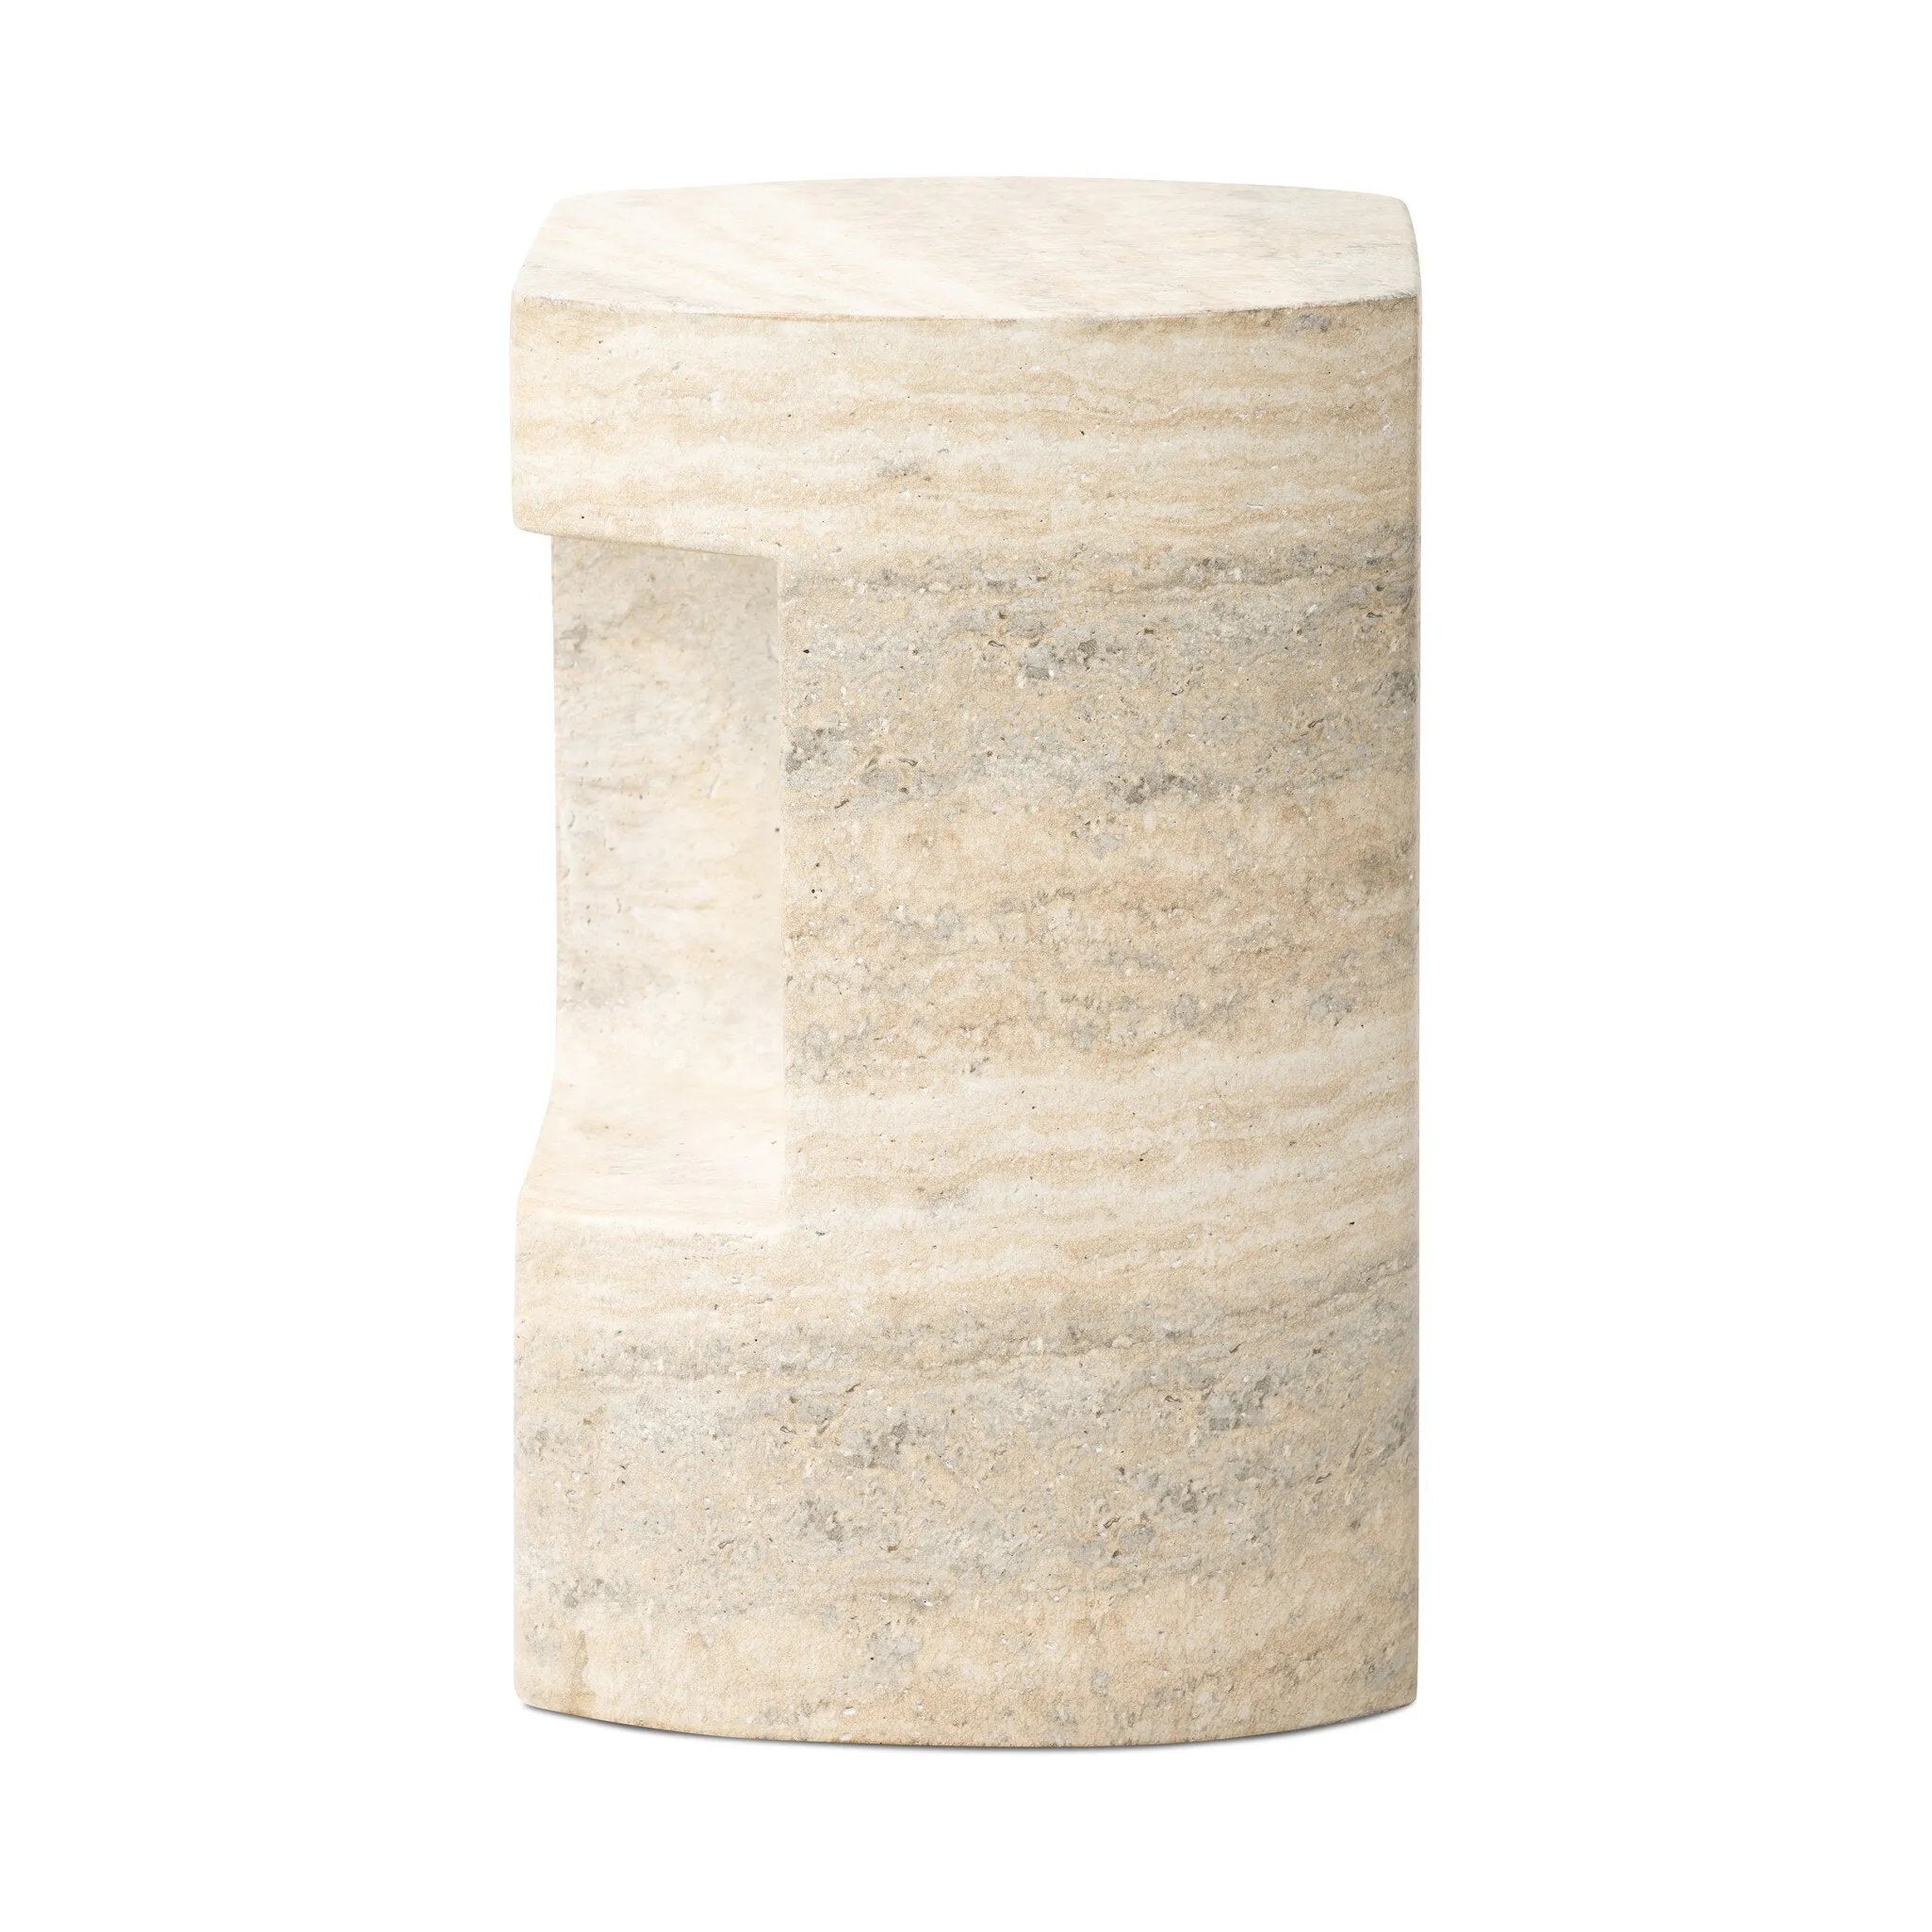 Cutout detailing brings a clean, modern vibe to a versatile end table of cast concrete. A water transfer finish creates a textured look and sandy hue resembling natural travertine.Collection: Chandle Amethyst Home provides interior design, new home construction design consulting, vintage area rugs, and lighting in the Washington metro area.